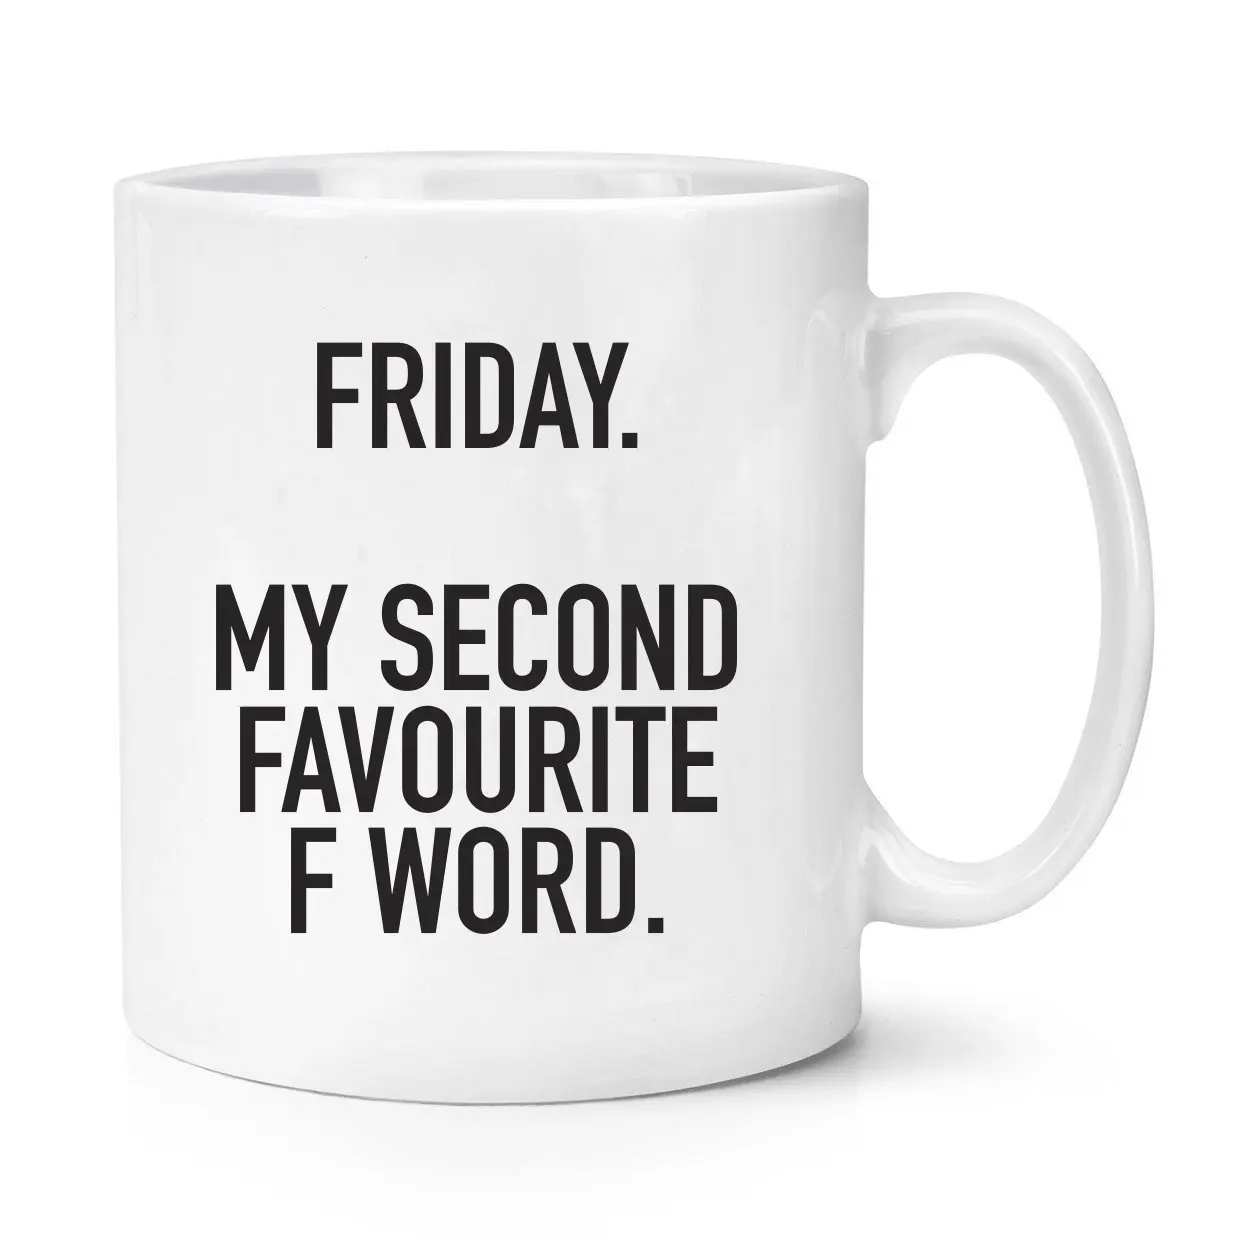 Funny Sarcastic Humor Message Gift Mug Friday is my Second Favorite F-Word 